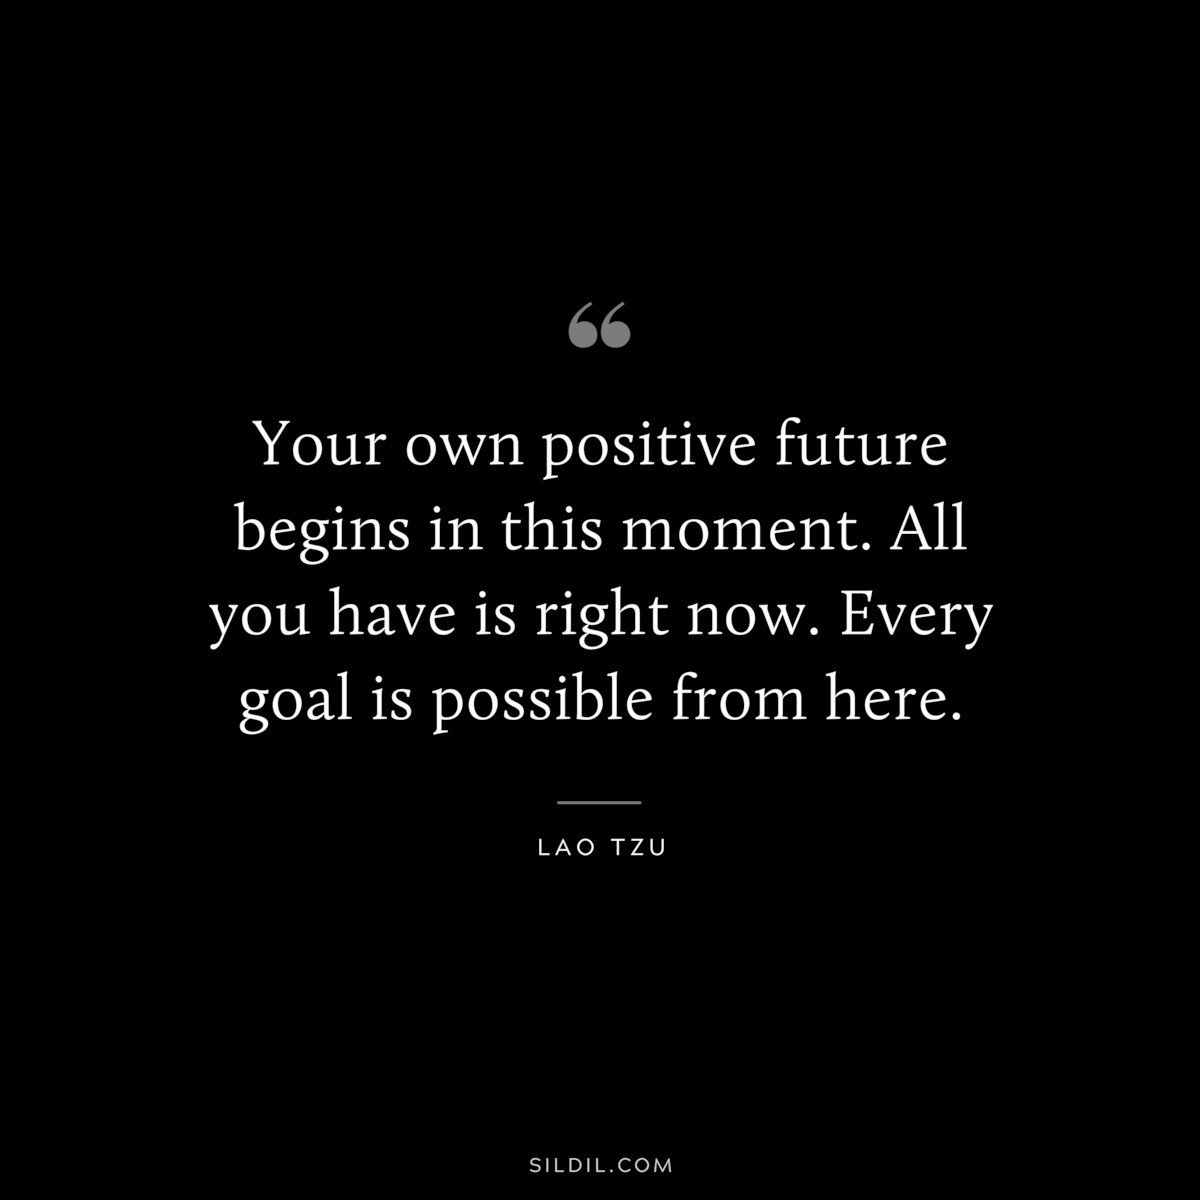 Your own positive future begins in this moment. All you have is right now. Every goal is possible from here. ― Lao Tzu